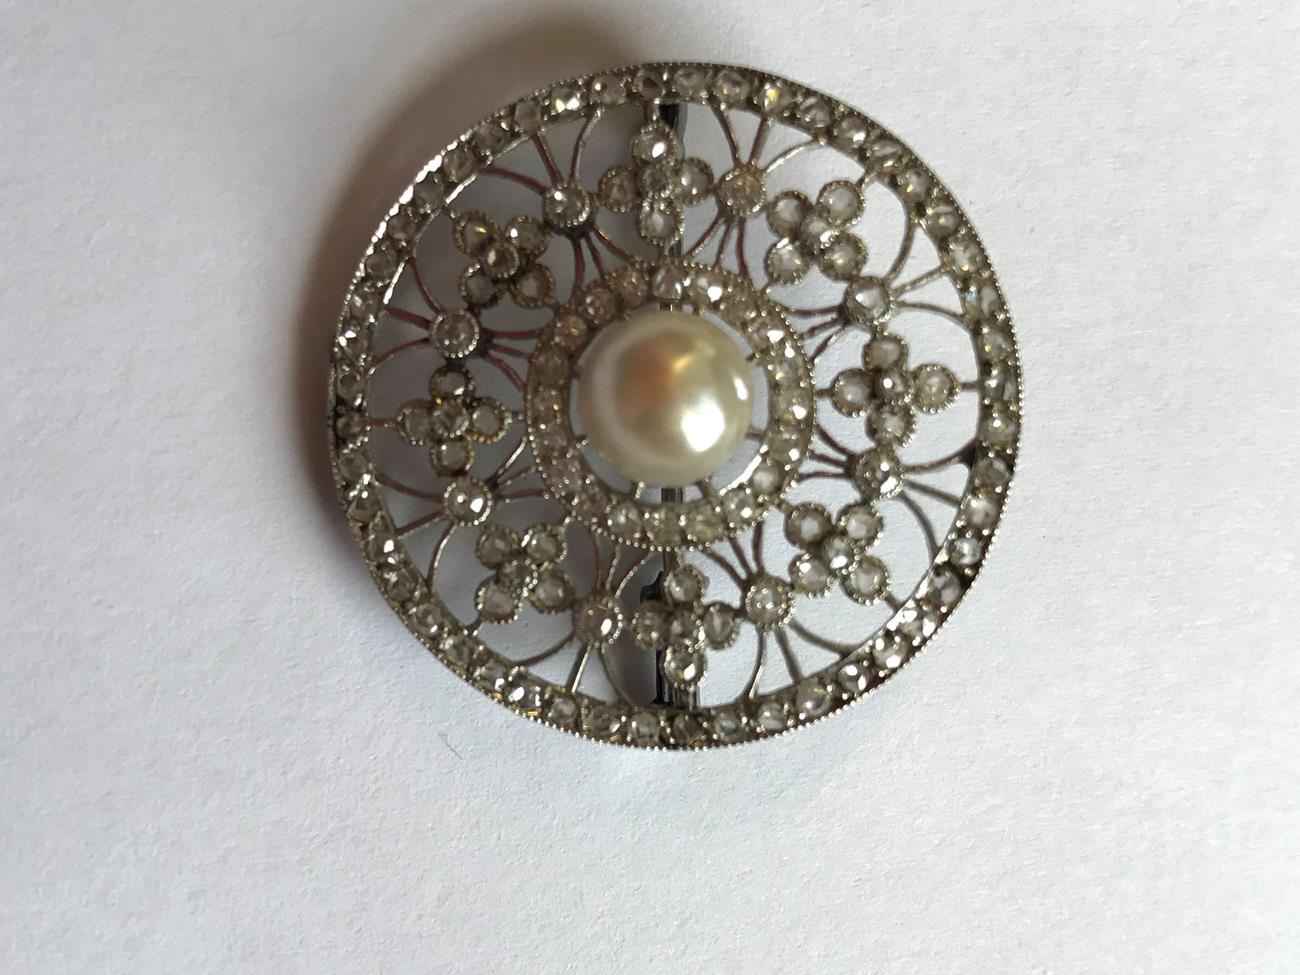 An Edwardian Diamond and Cultured Pearl Brooch, the cultured pearl within an old cut and rose cut - Image 2 of 5